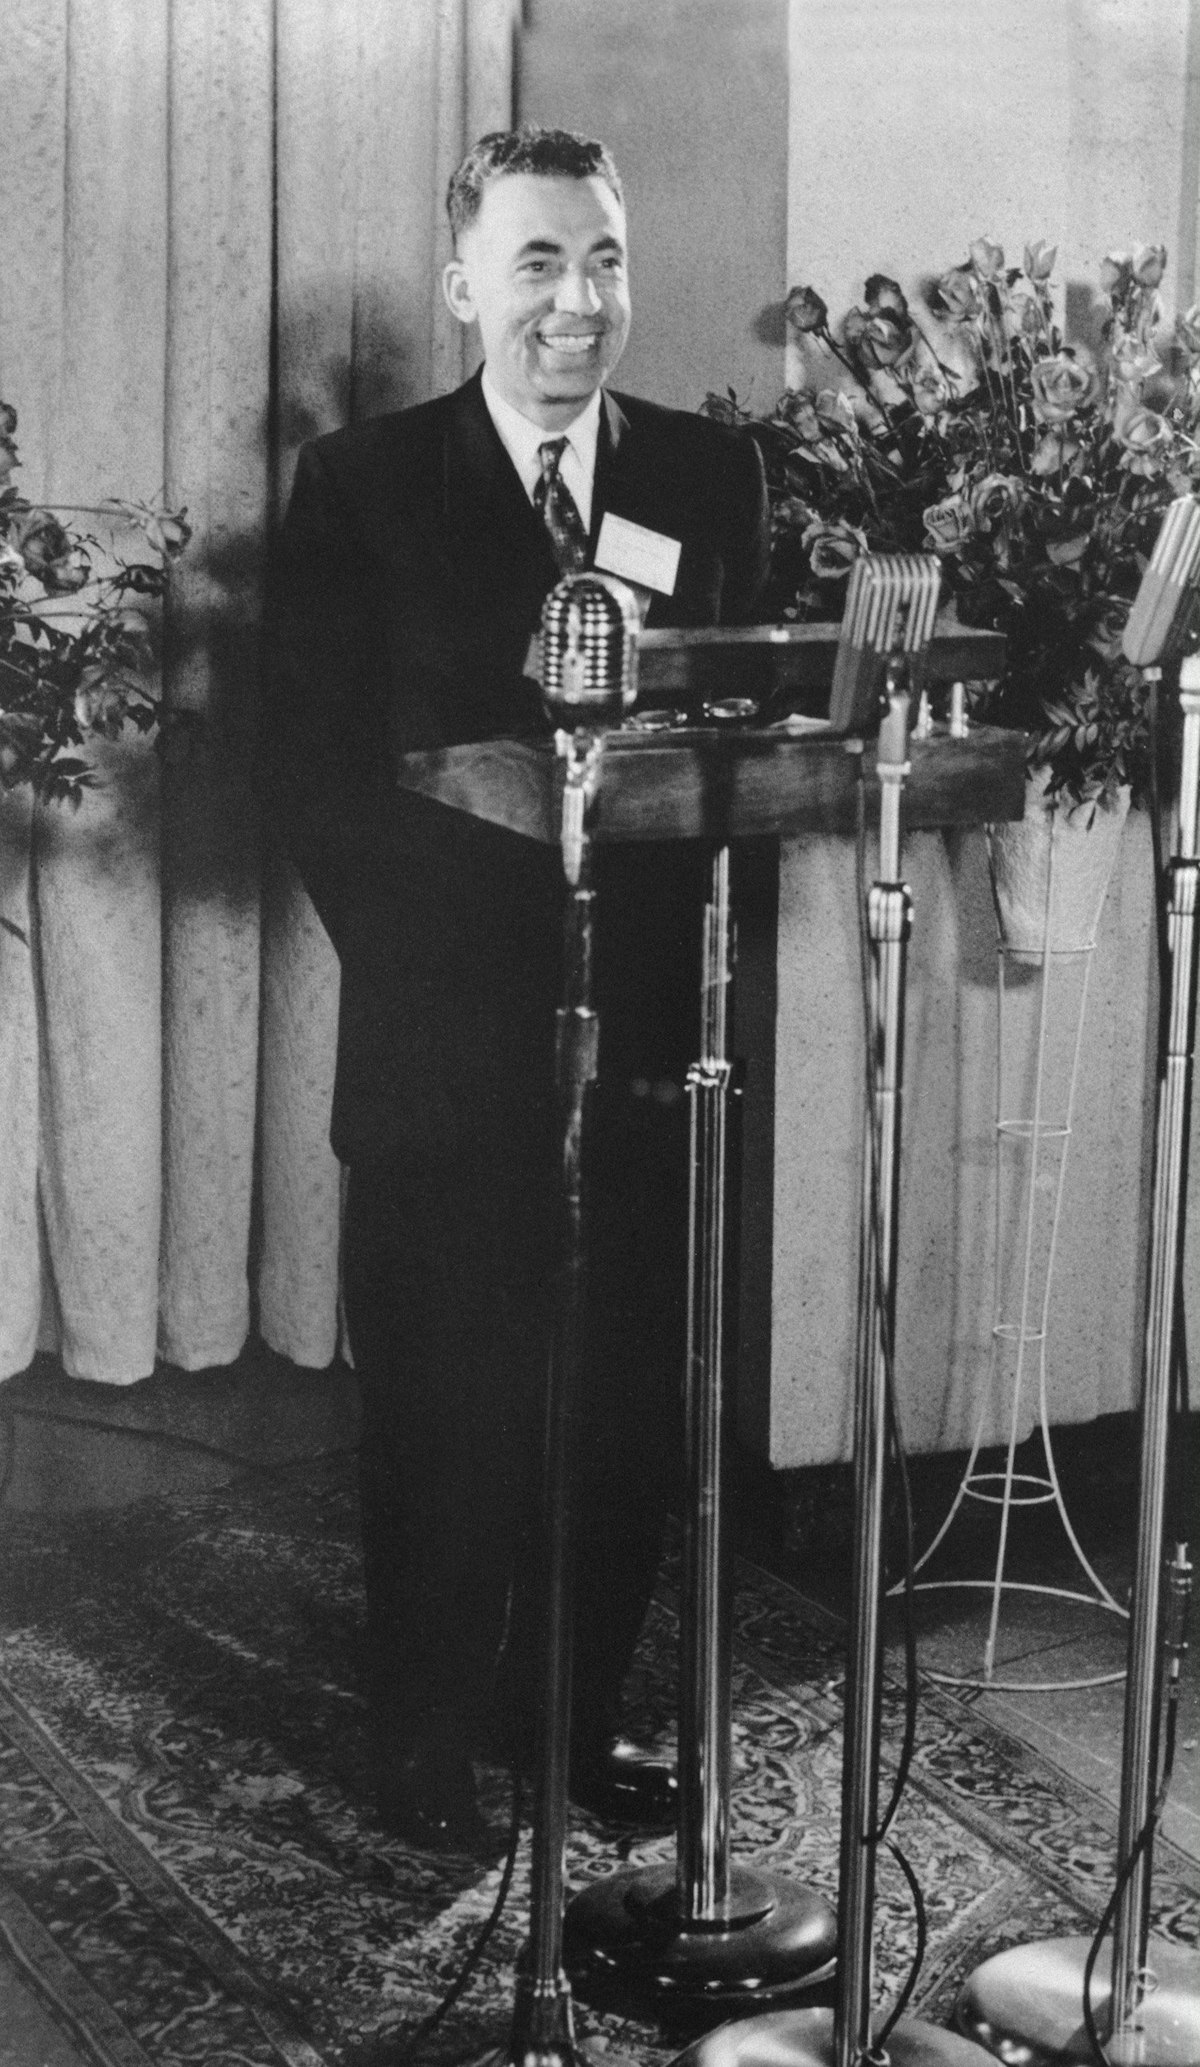 Mr. Furutan at the dedication of the Baha'i House of Worship in Wilmette, United States of America, 1953.